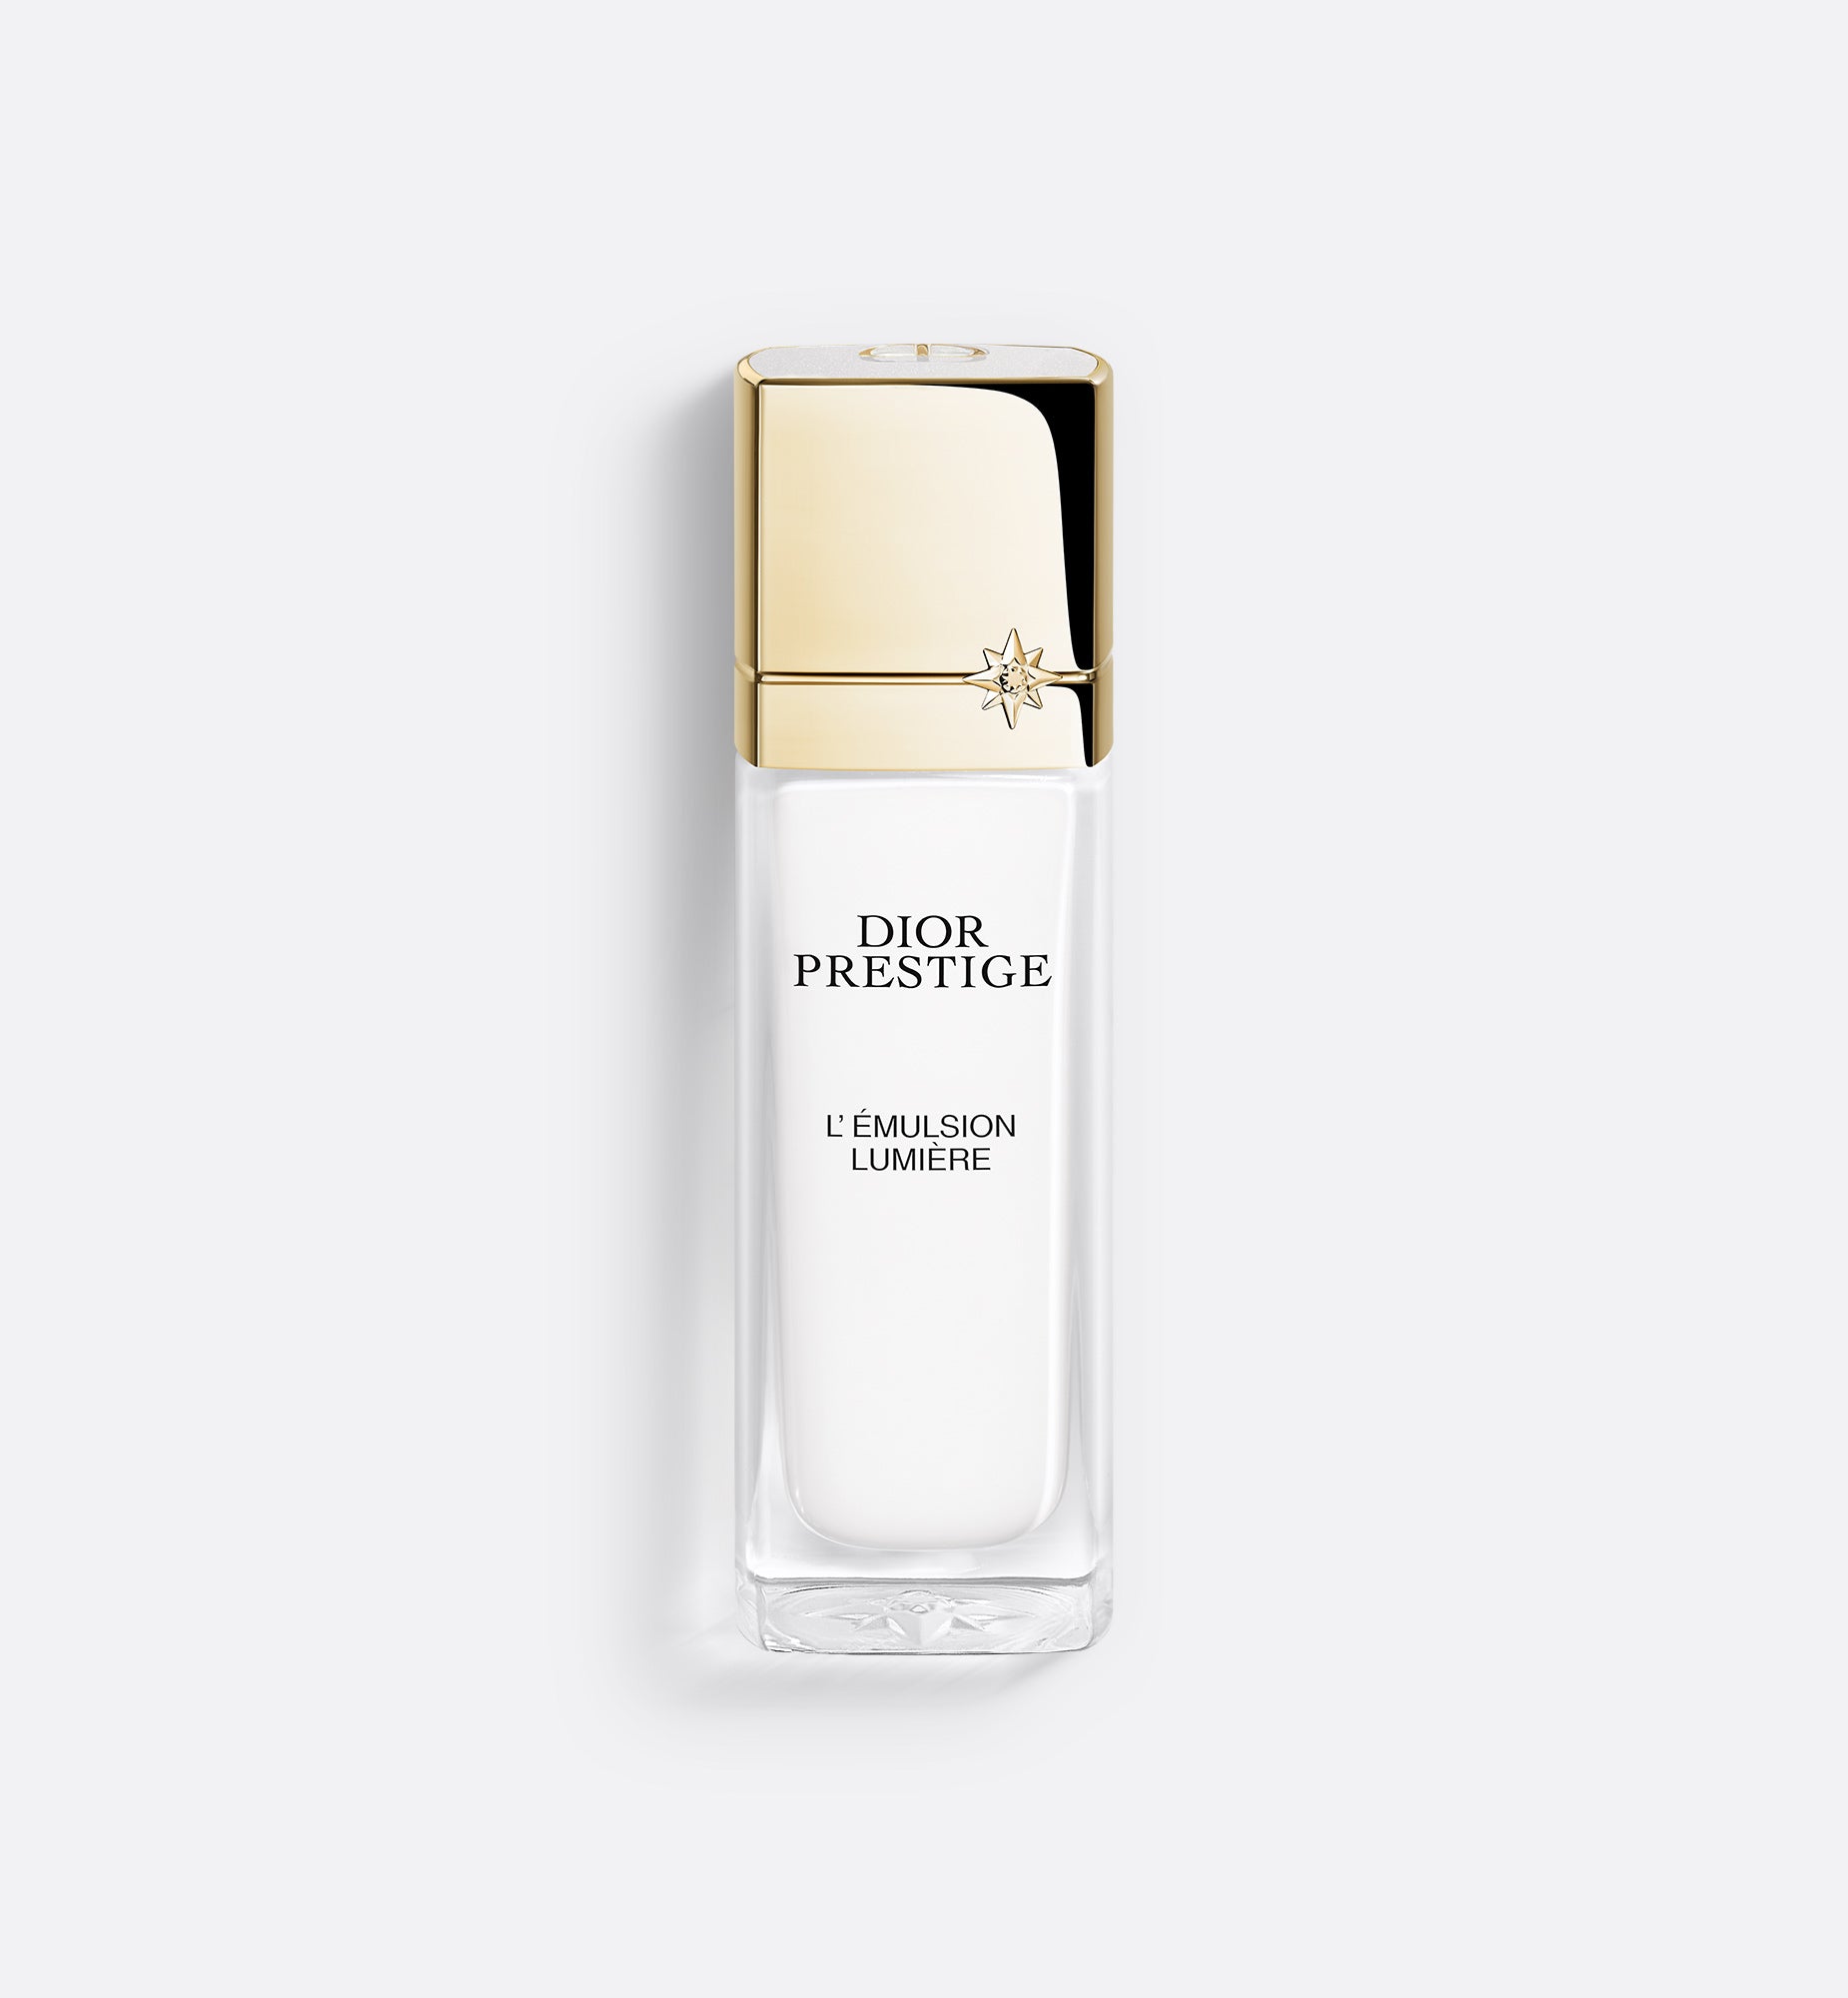 Dior Prestige L'Émulsion Lumière | Brightening and Revitalizing Skincare - Hydrates, Revitalizes and Evens Out the Skin